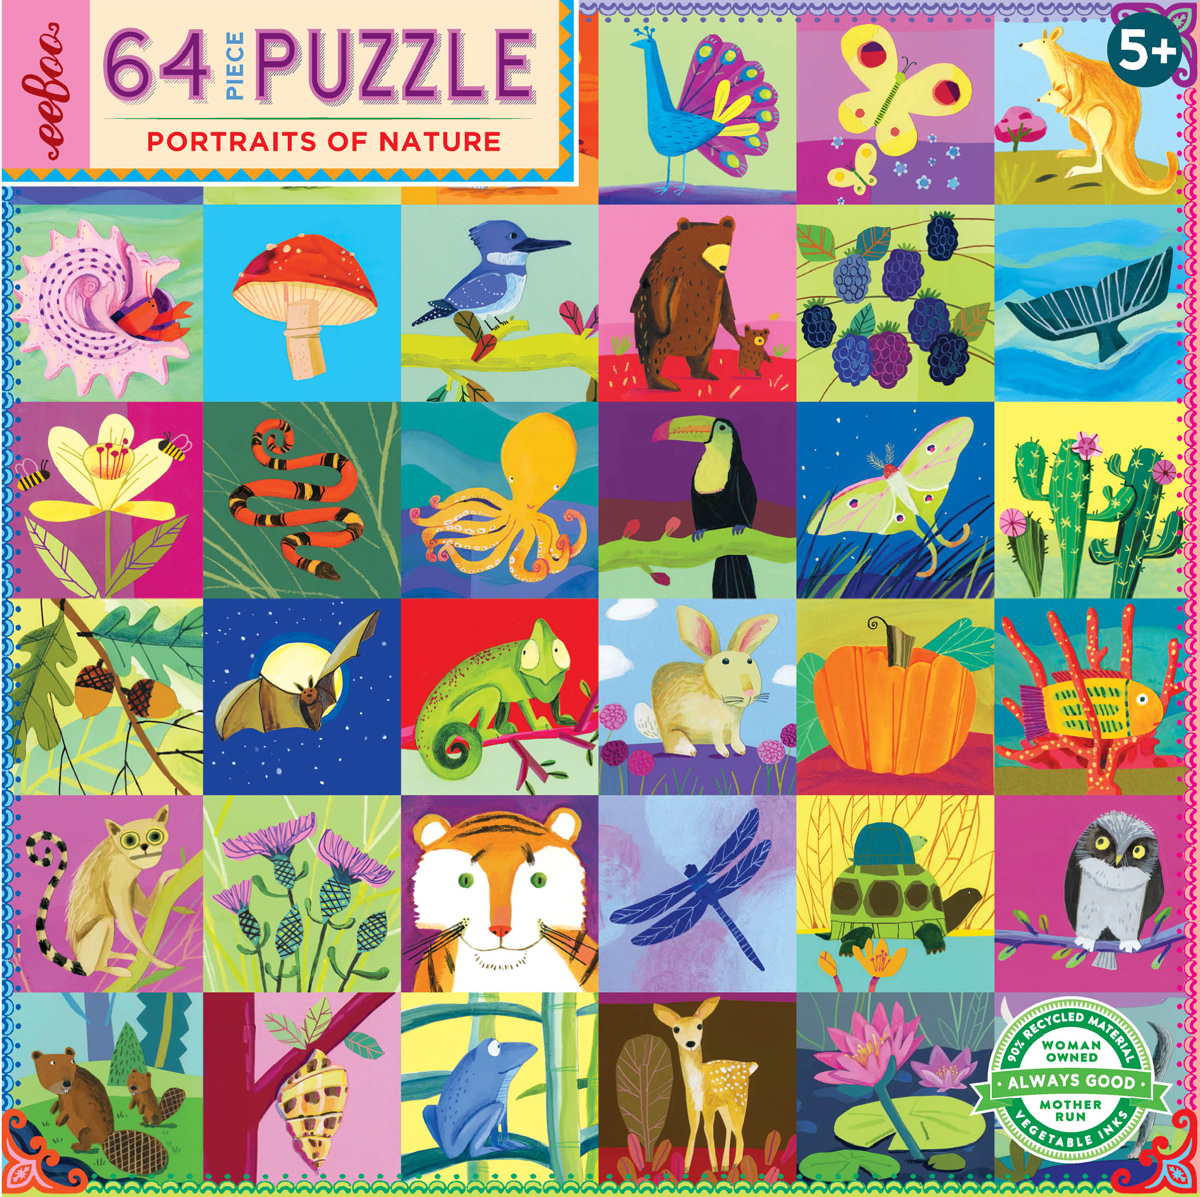 Portraits of Nature Animals Jigsaw Puzzle